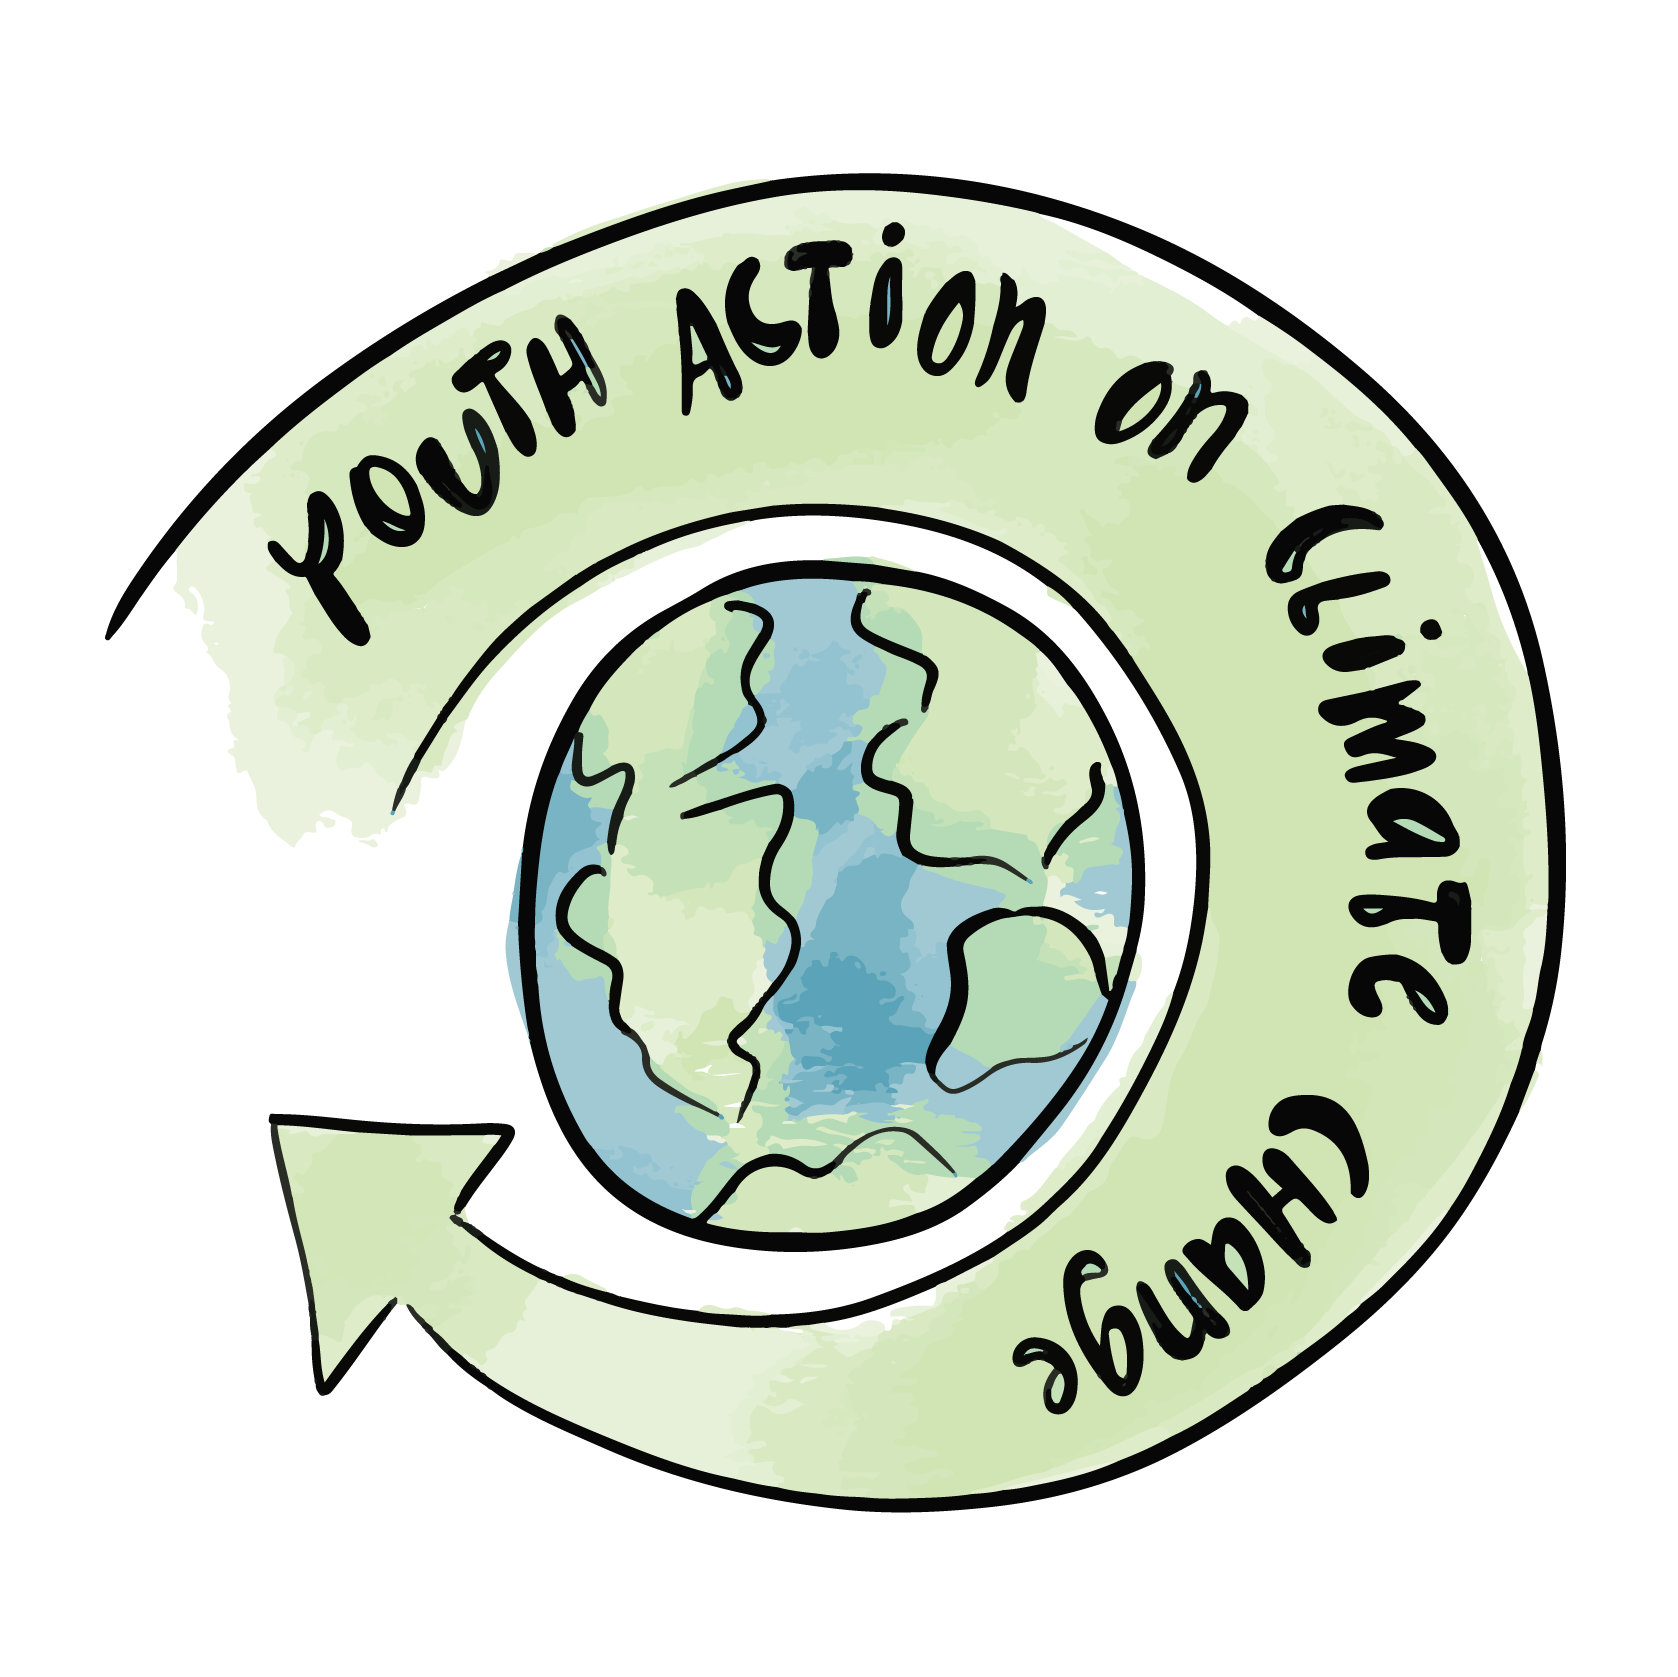 youth action on climate change